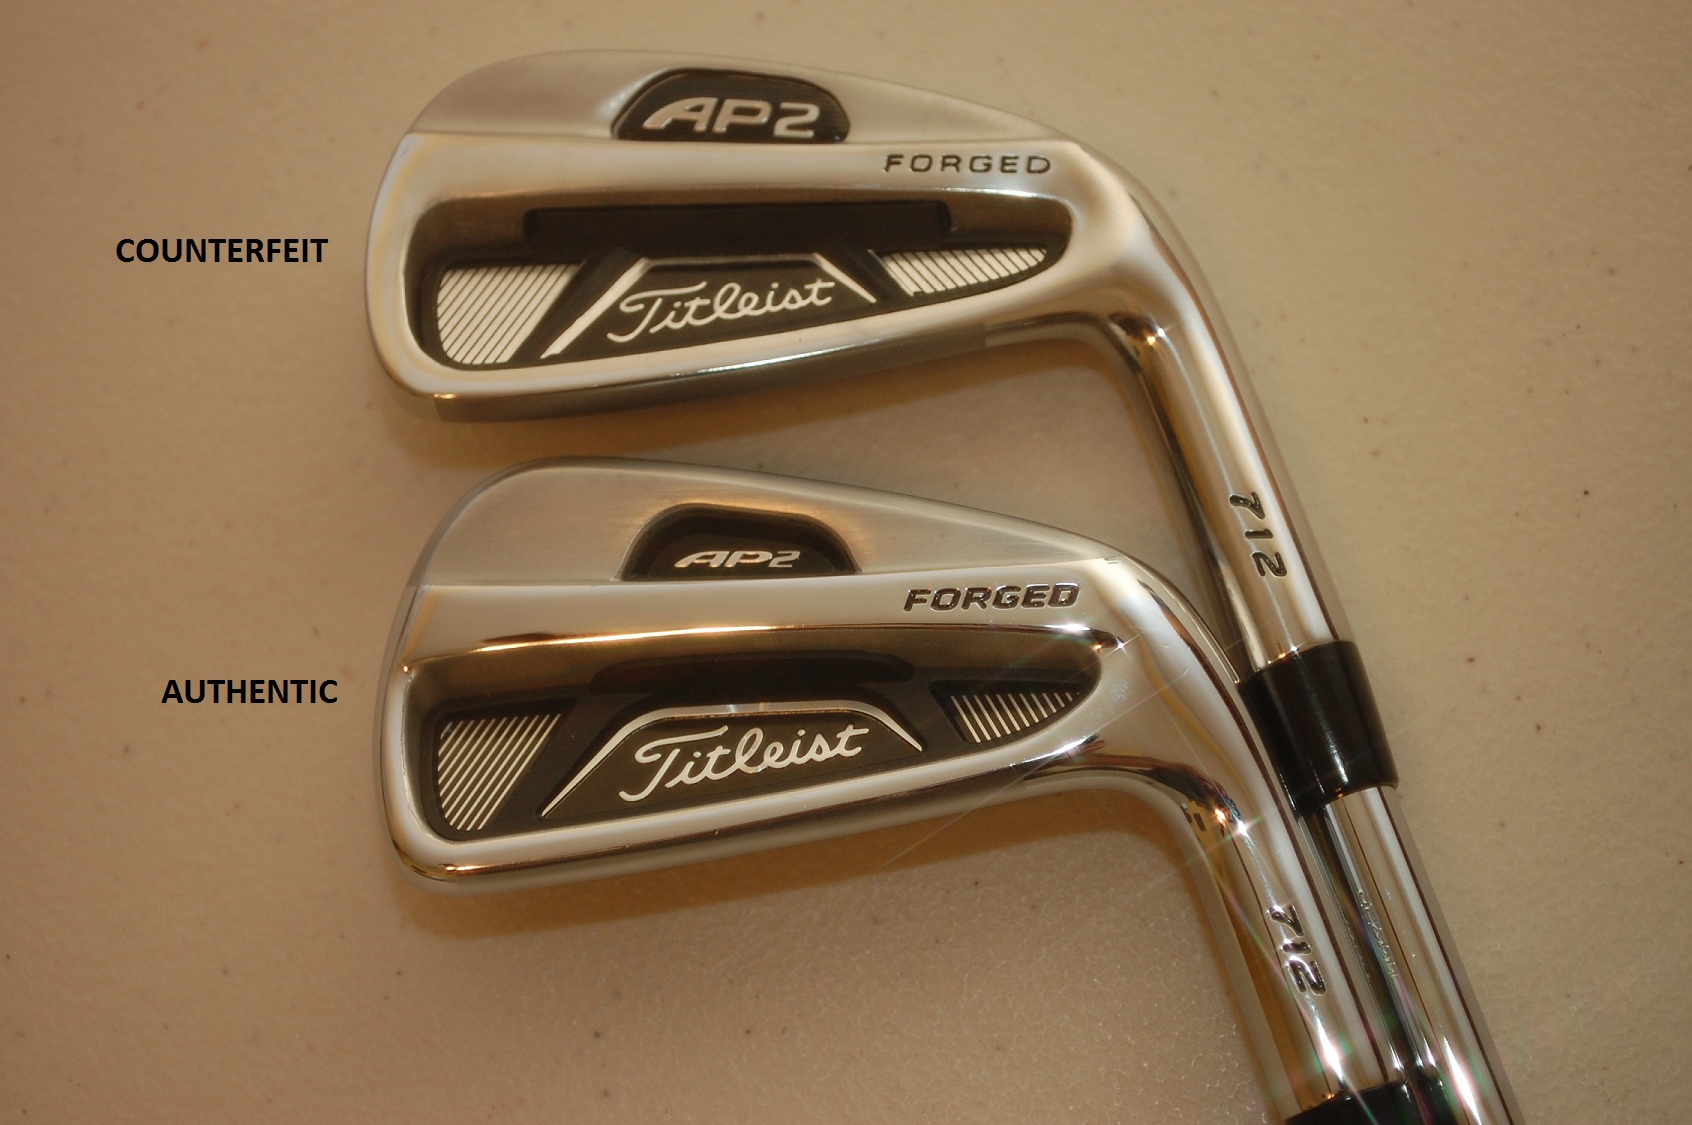 A fake club versus a real one. Could you spot the difference?